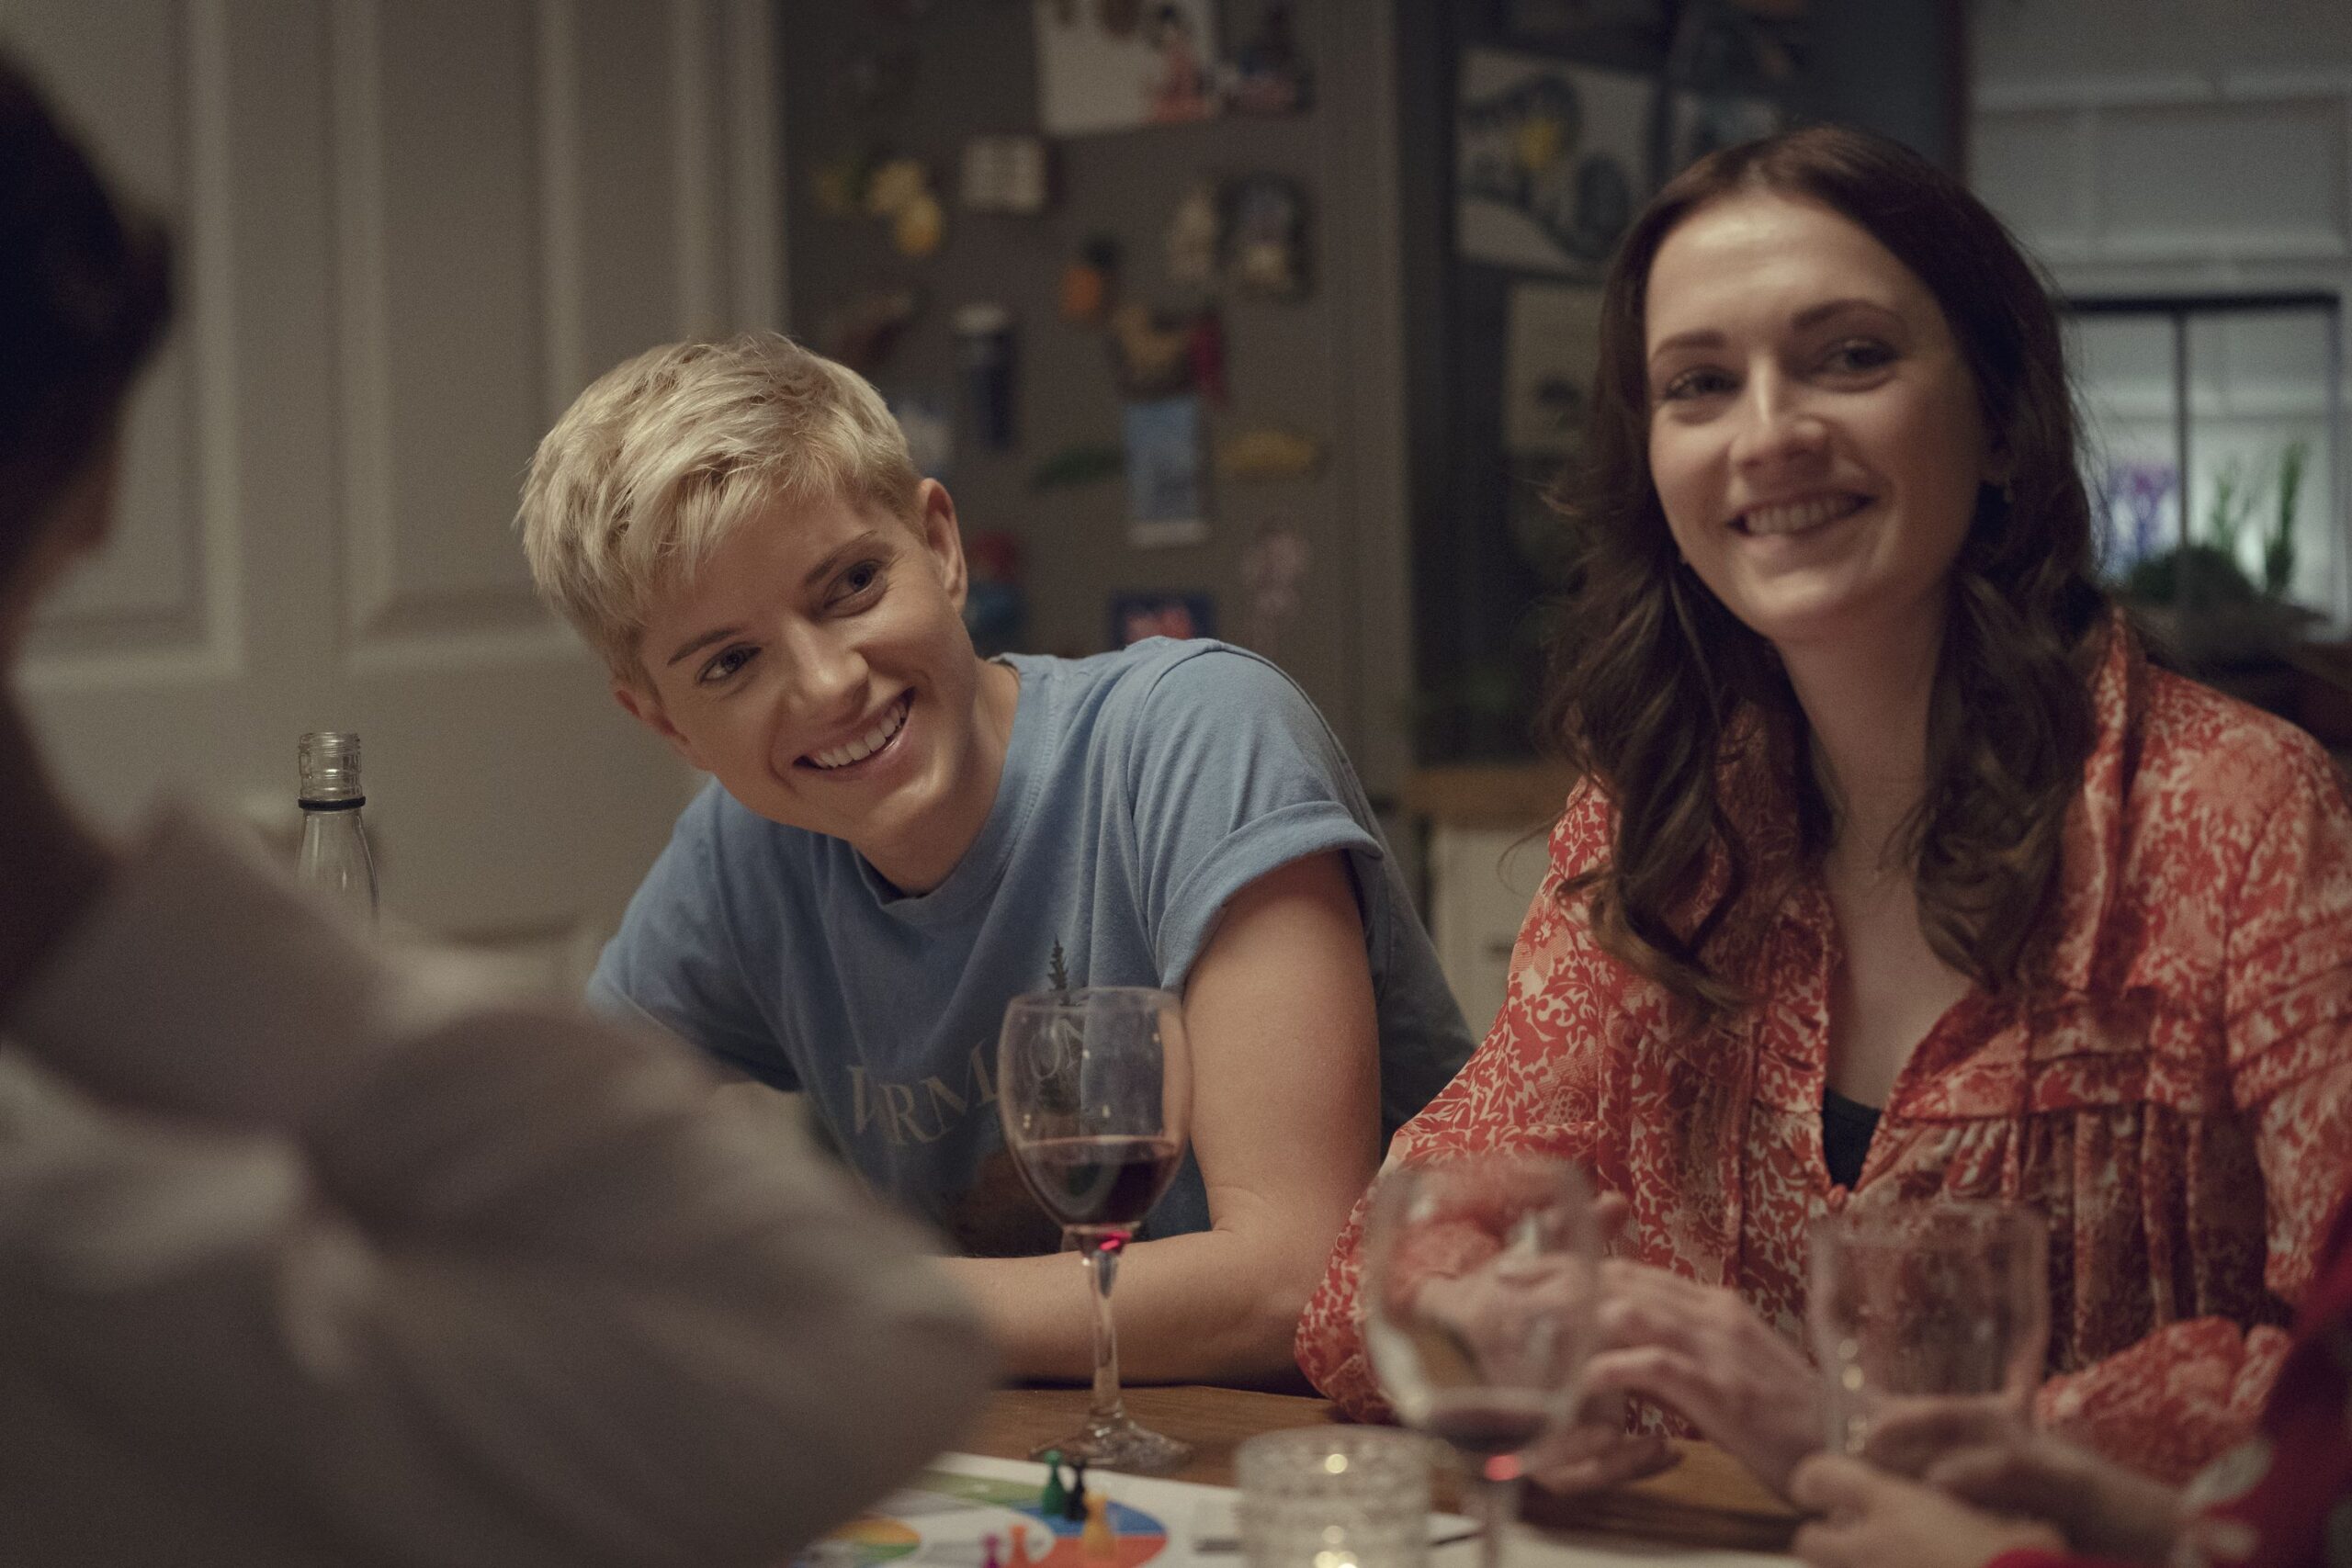 Charlotte Ritchie and Mae Martin portrayed a homosexual couple in Feel Good.